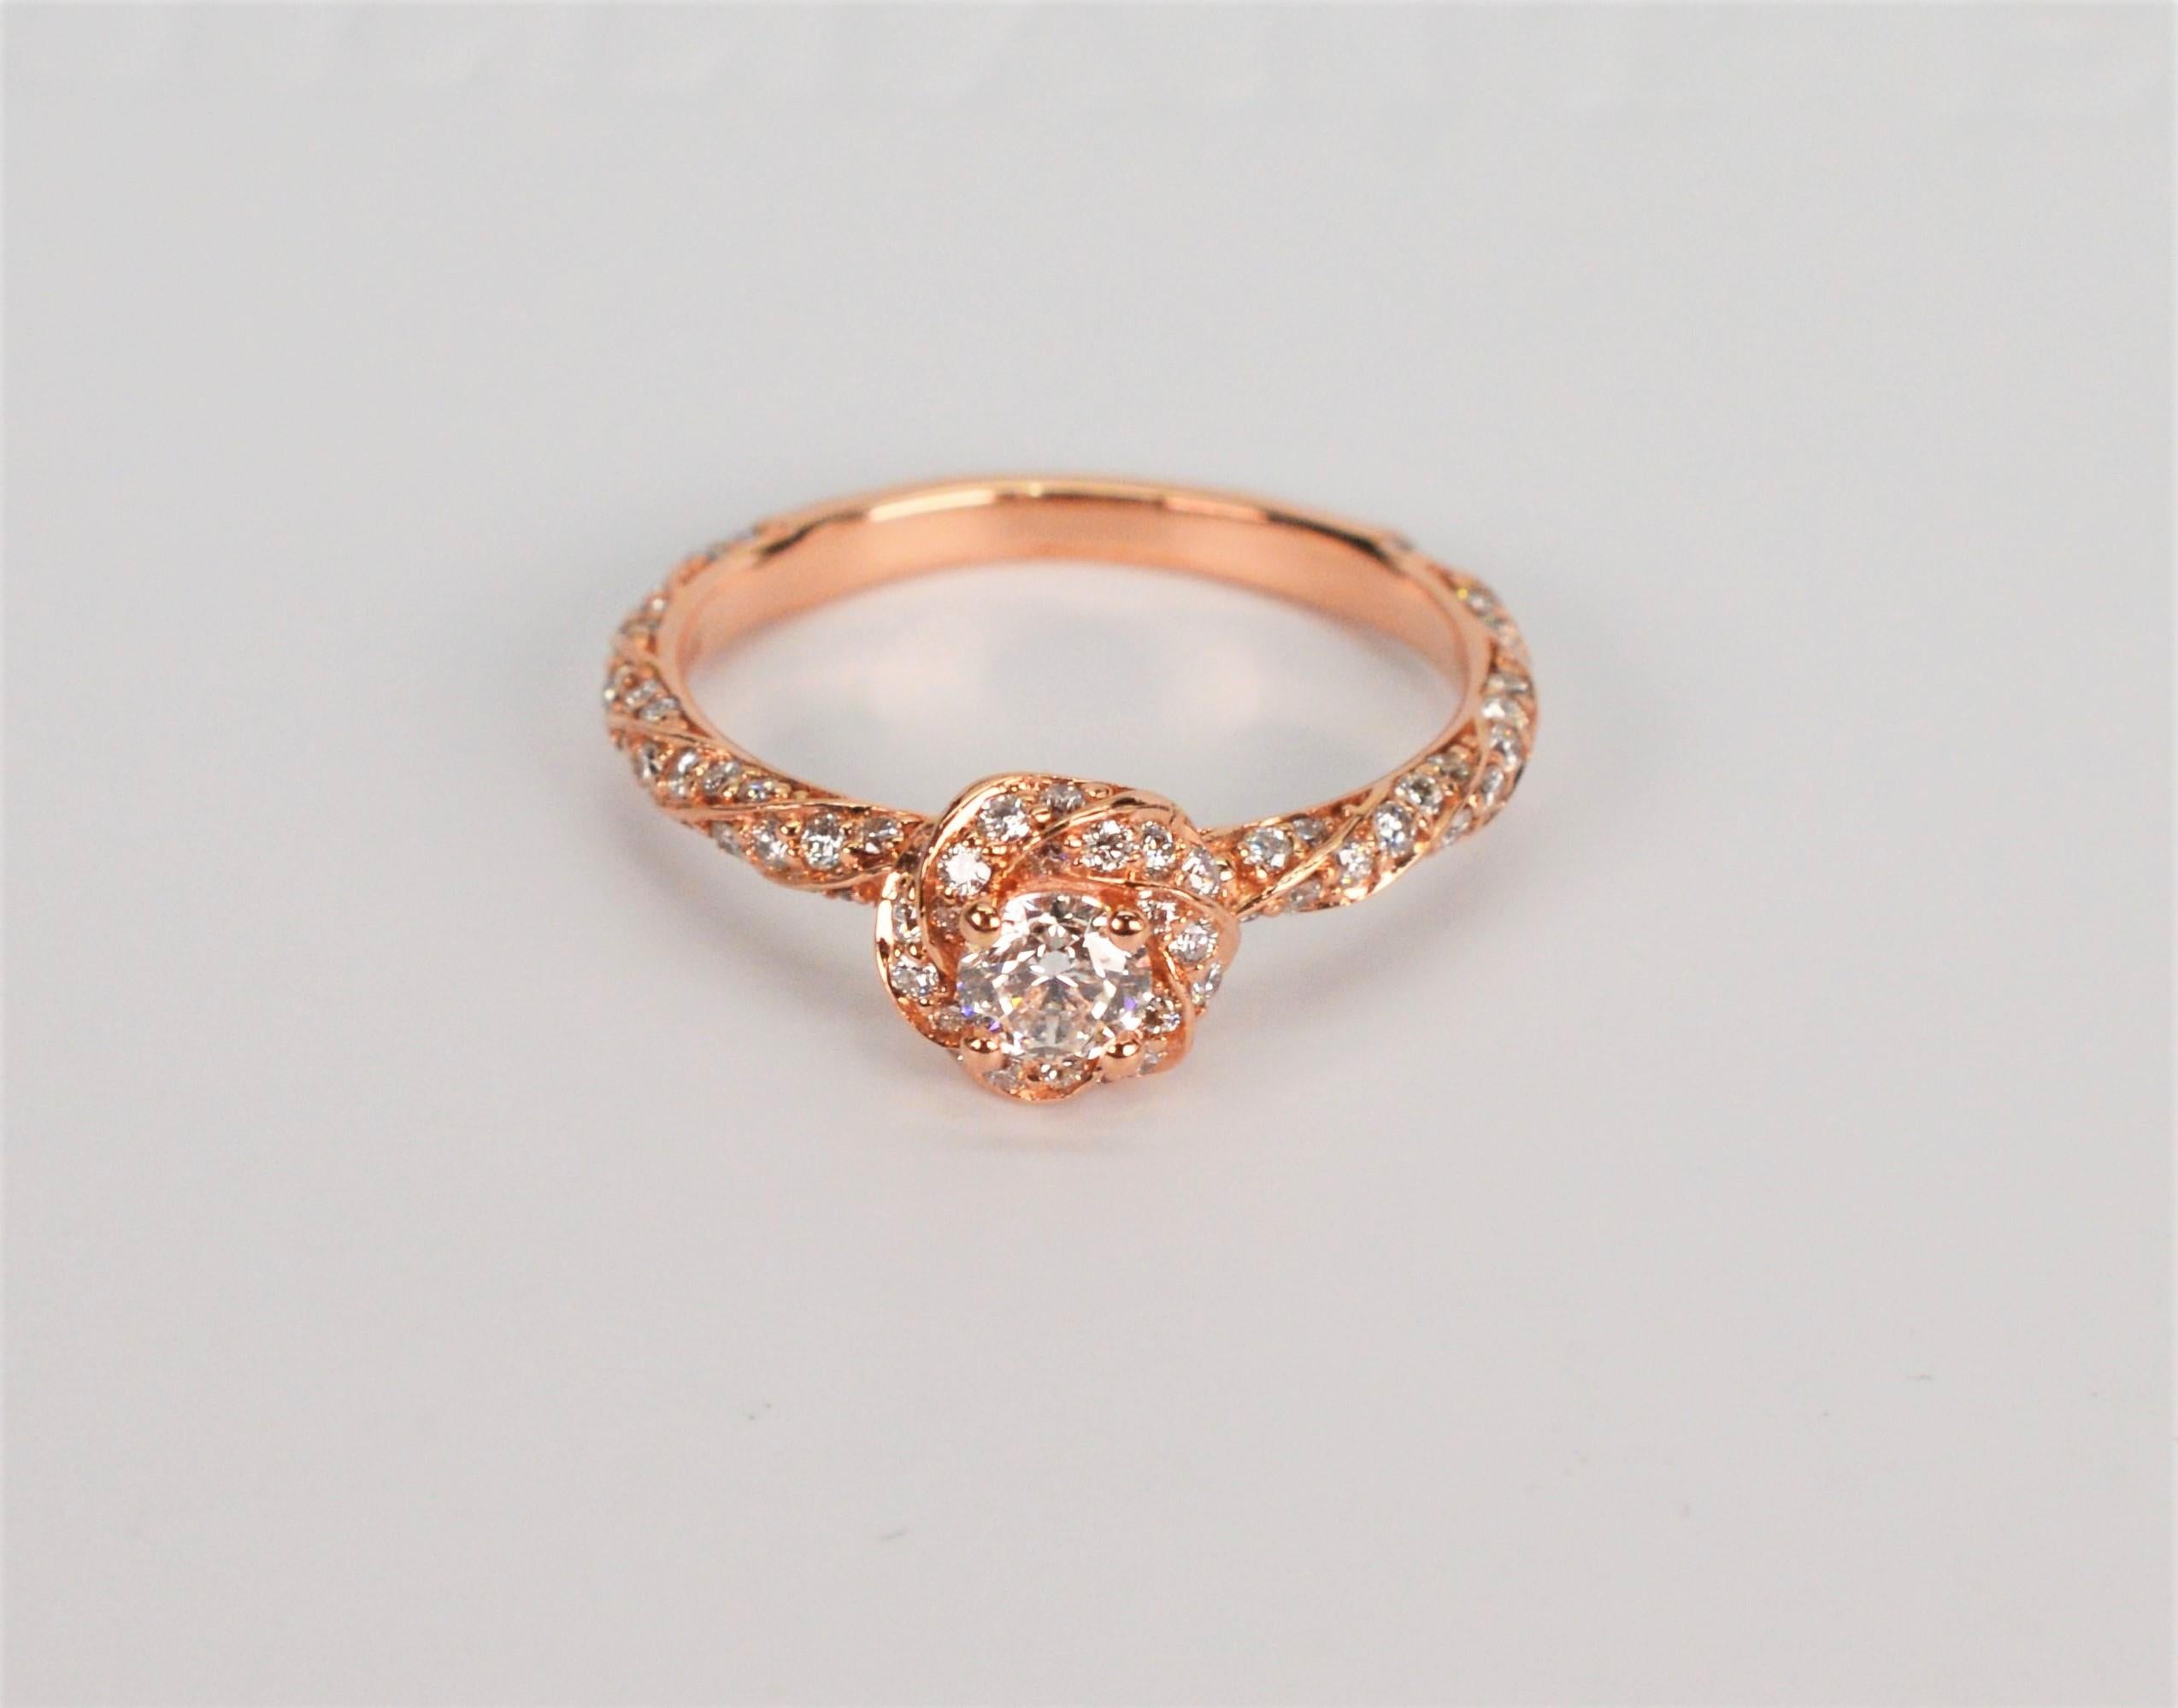 So sweet in 14 karat rose gold, this floral inspired diamond ring is perfect for your princess. By Brilliant Earth, known for acquiring conflict free natural diamonds from diamond mine operators that are dedicated to minimizing their impact on the